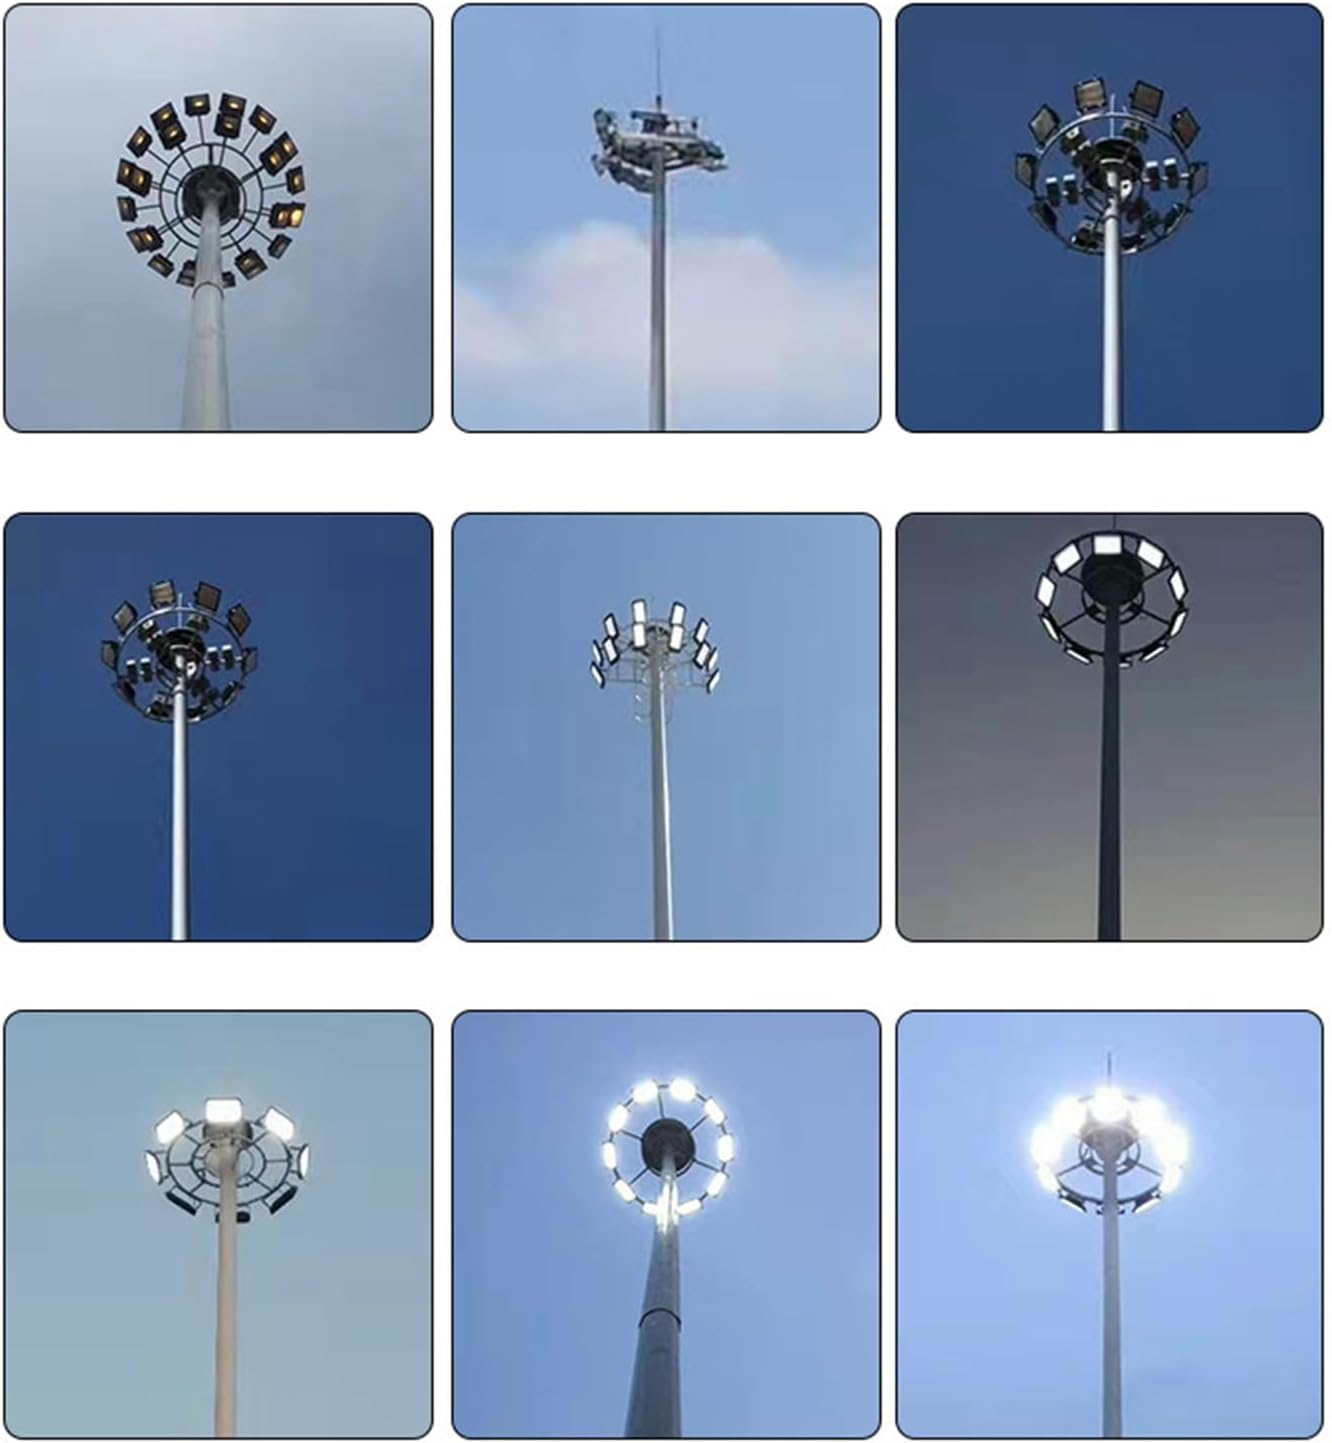 1500W Equivalent LED Outdoor Stadium/Parking Flood  Lights 240W 36000LM Super Bright Wall Mount Commercial IP65